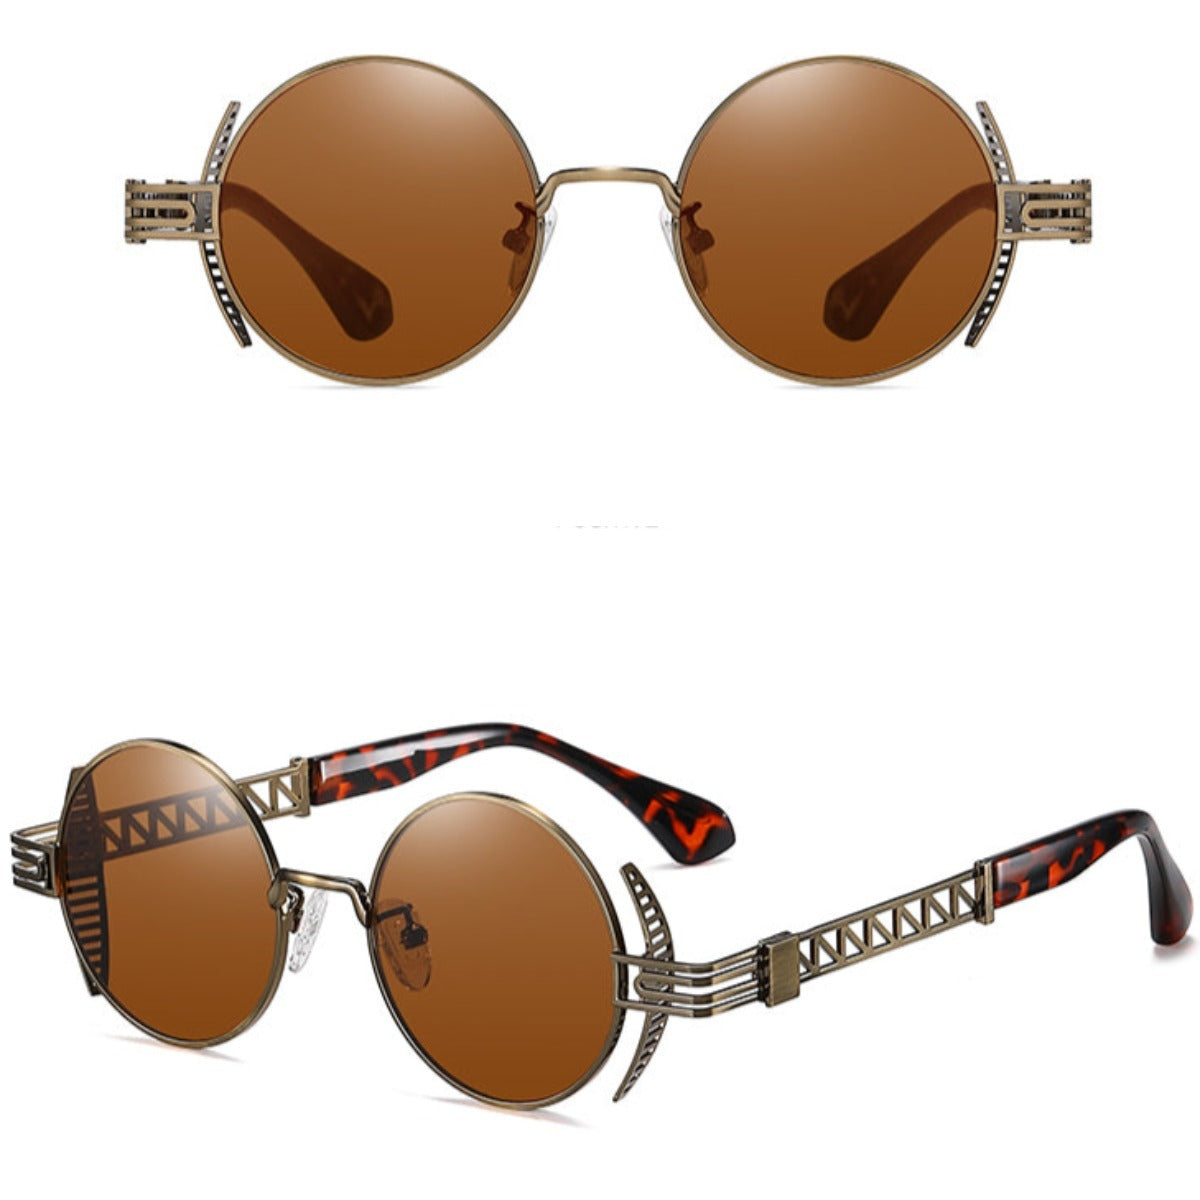 The Rebellion Road Sunglasses are a vintage retro design with metal frames and brown lenses. These Rebellion Road Sunglasses exude style and make a bold fashion statement.